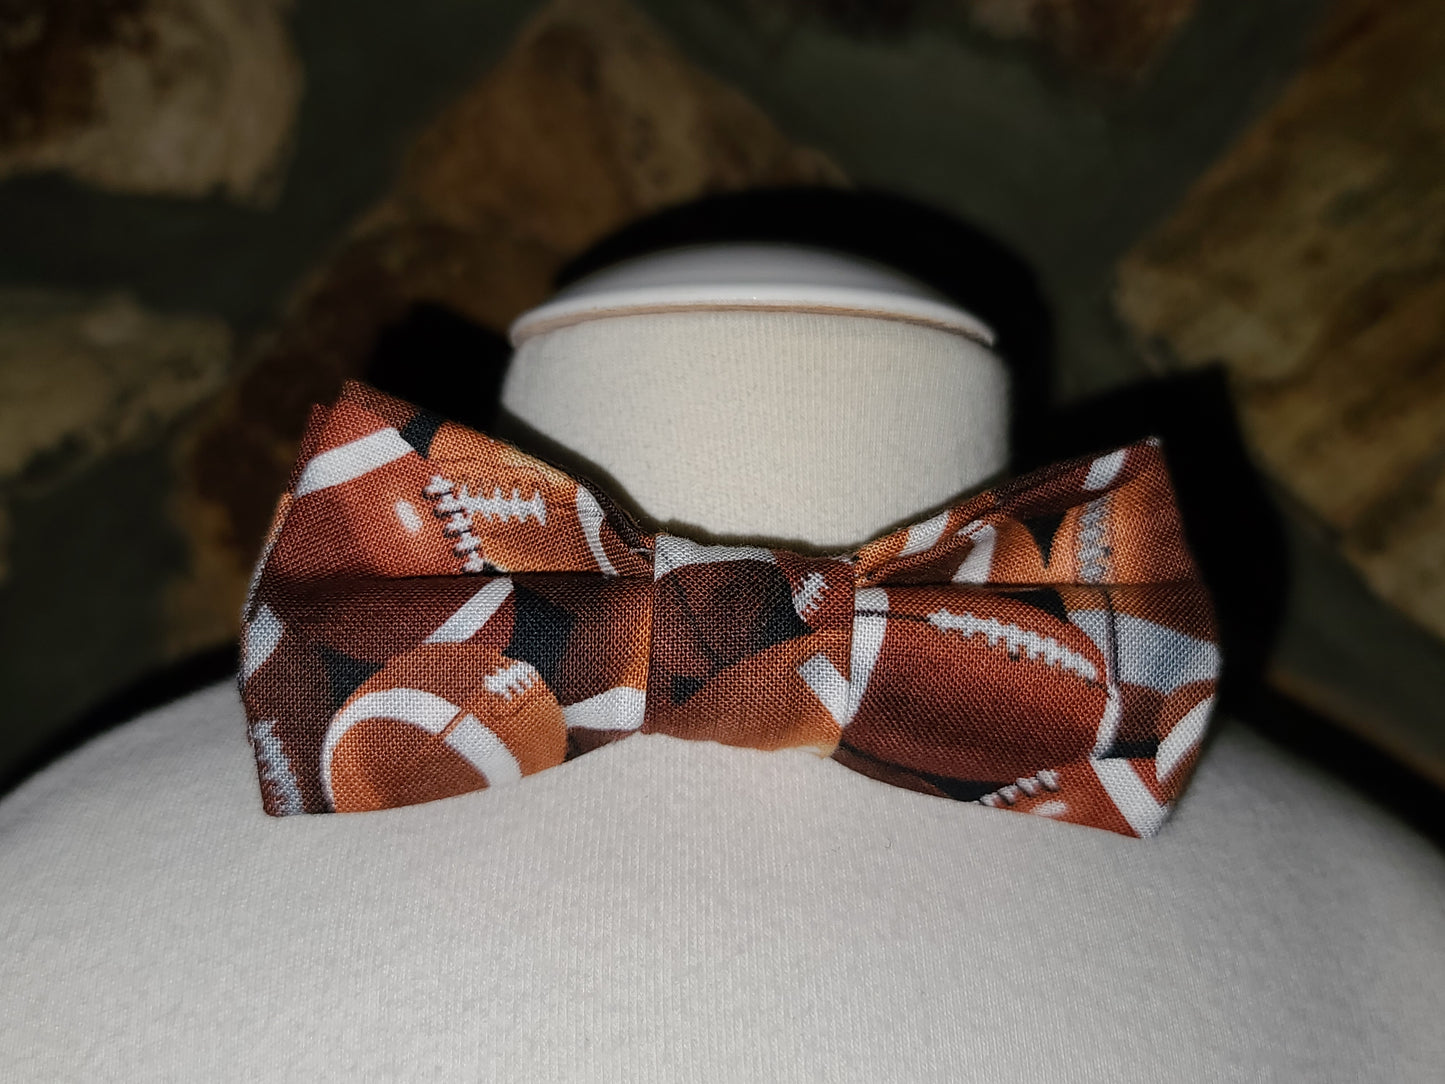 Football Themed child sized bowtie ball game